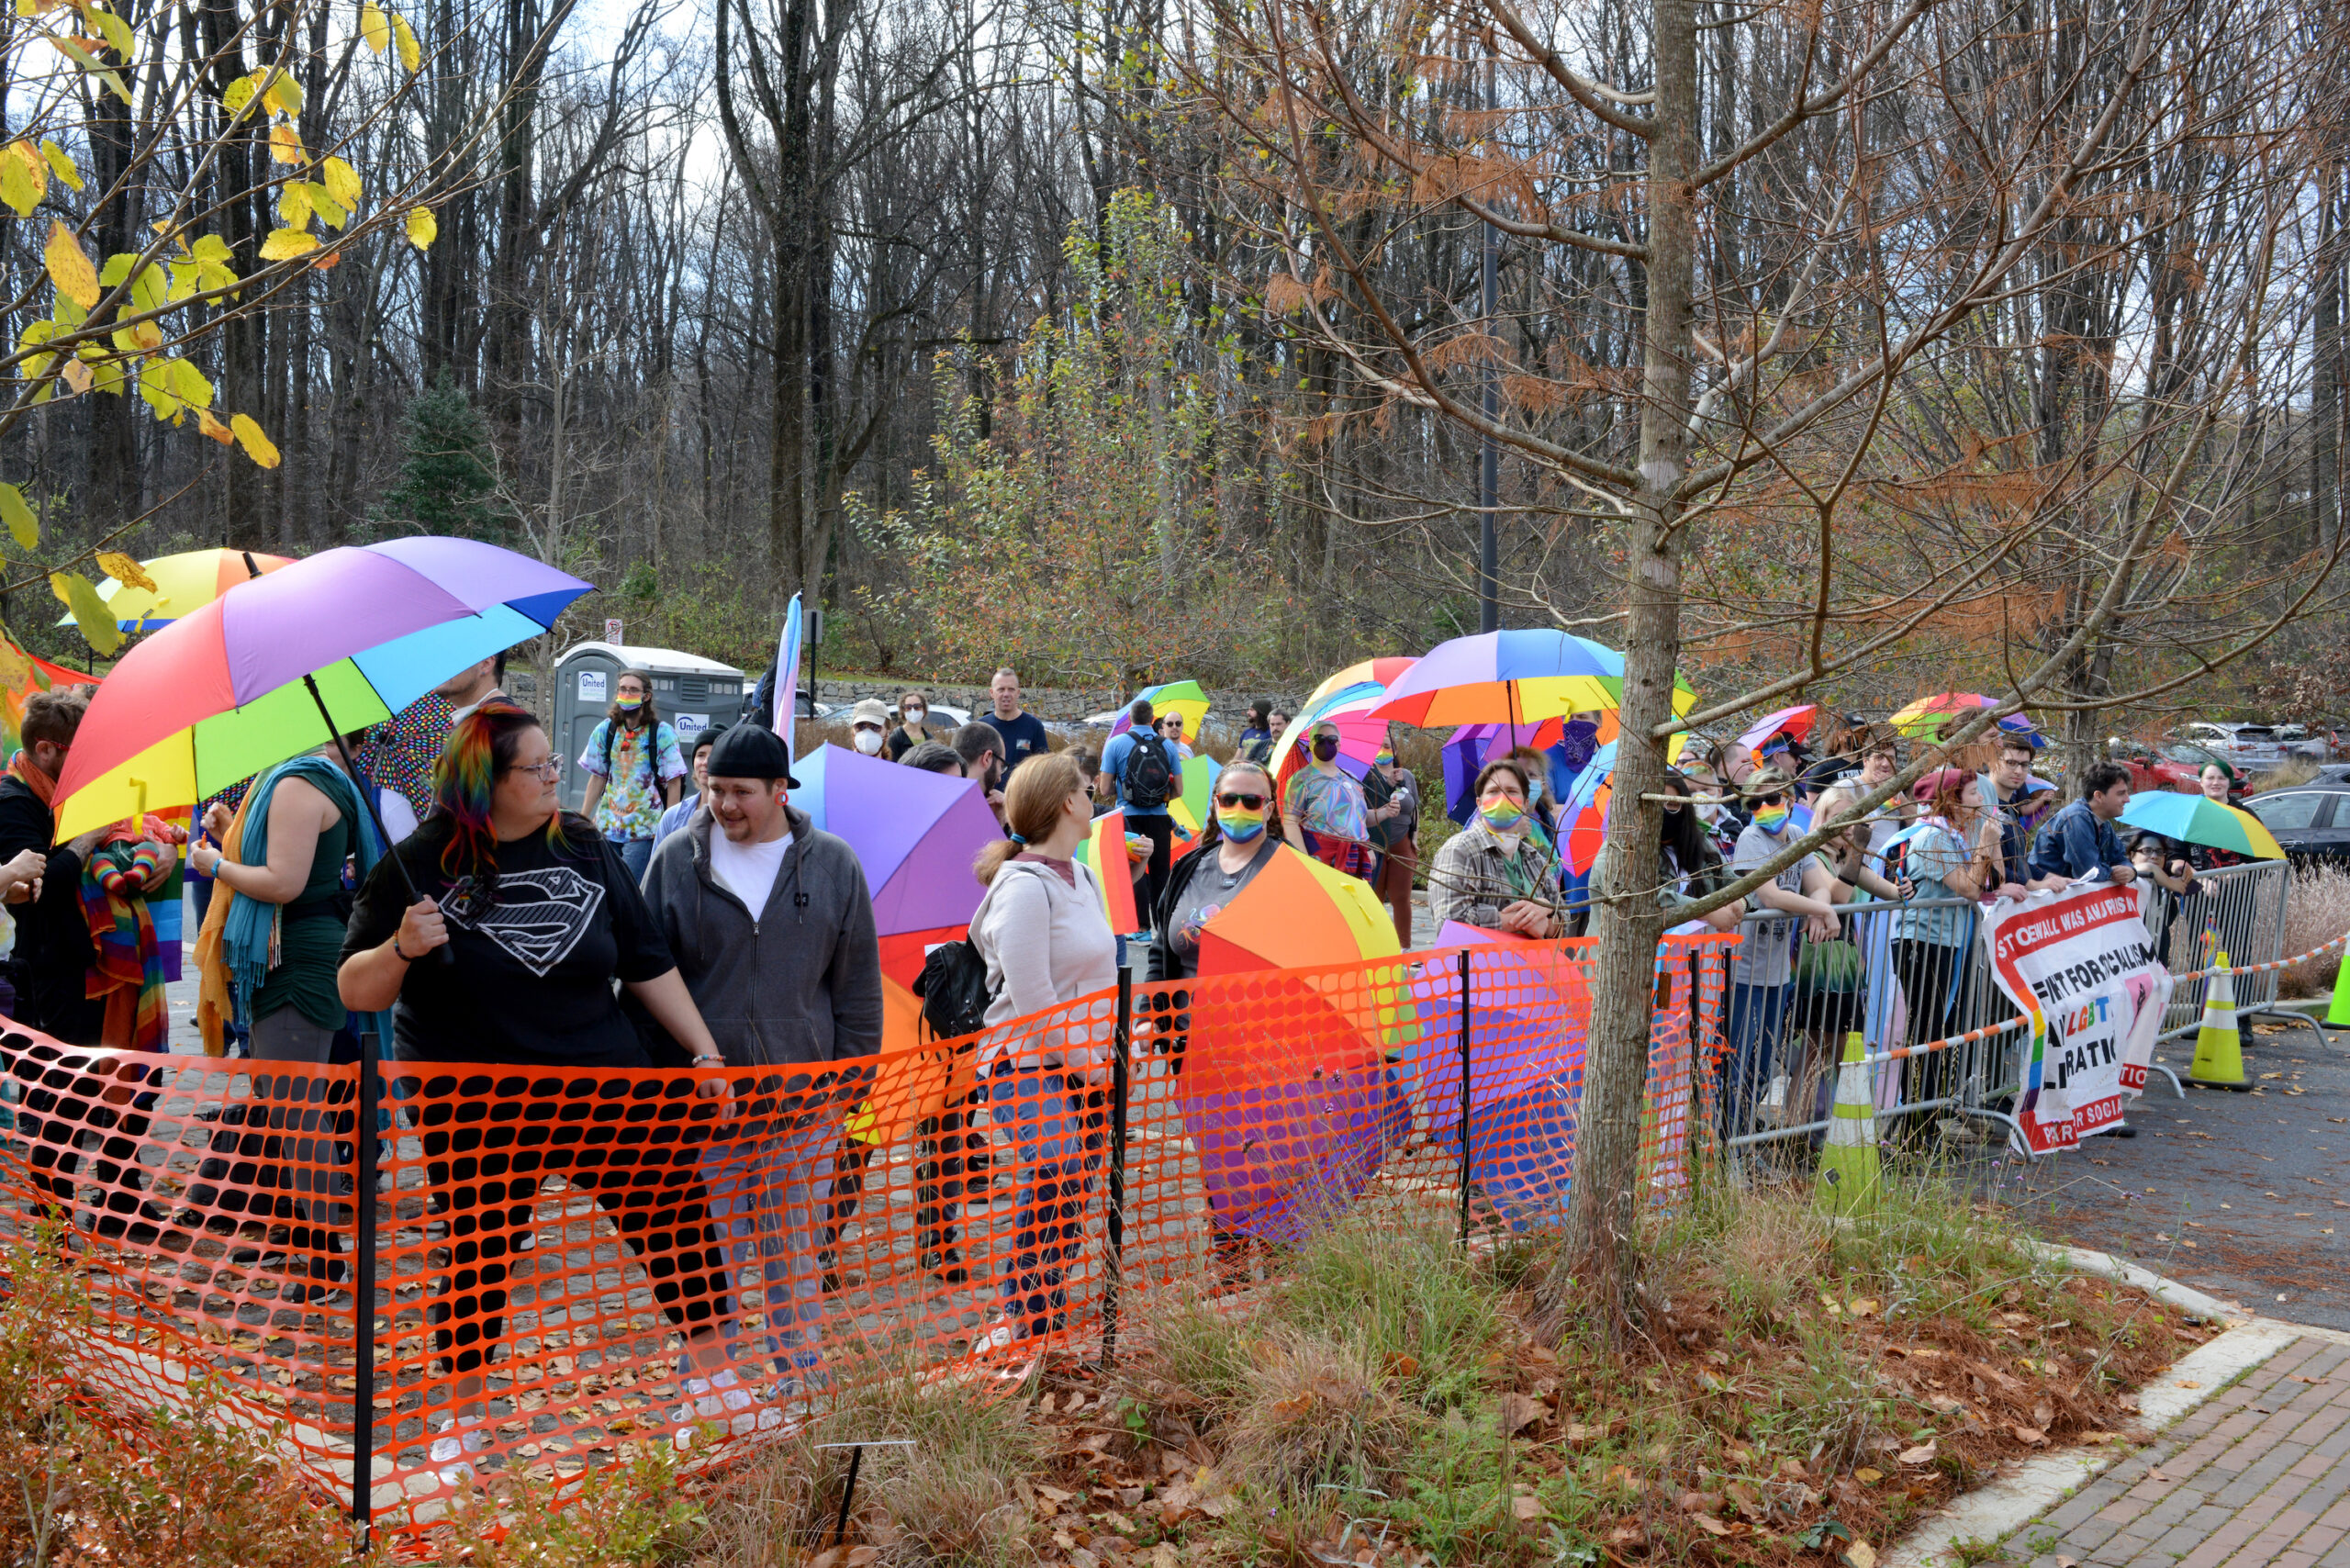 A crowd of about 100 people, many holding rainbow umbrellas, gather behind an orange barricade in a forest. They are in Silver Spring, Maryland defending a Drag Story Hour event from far-right protesters.